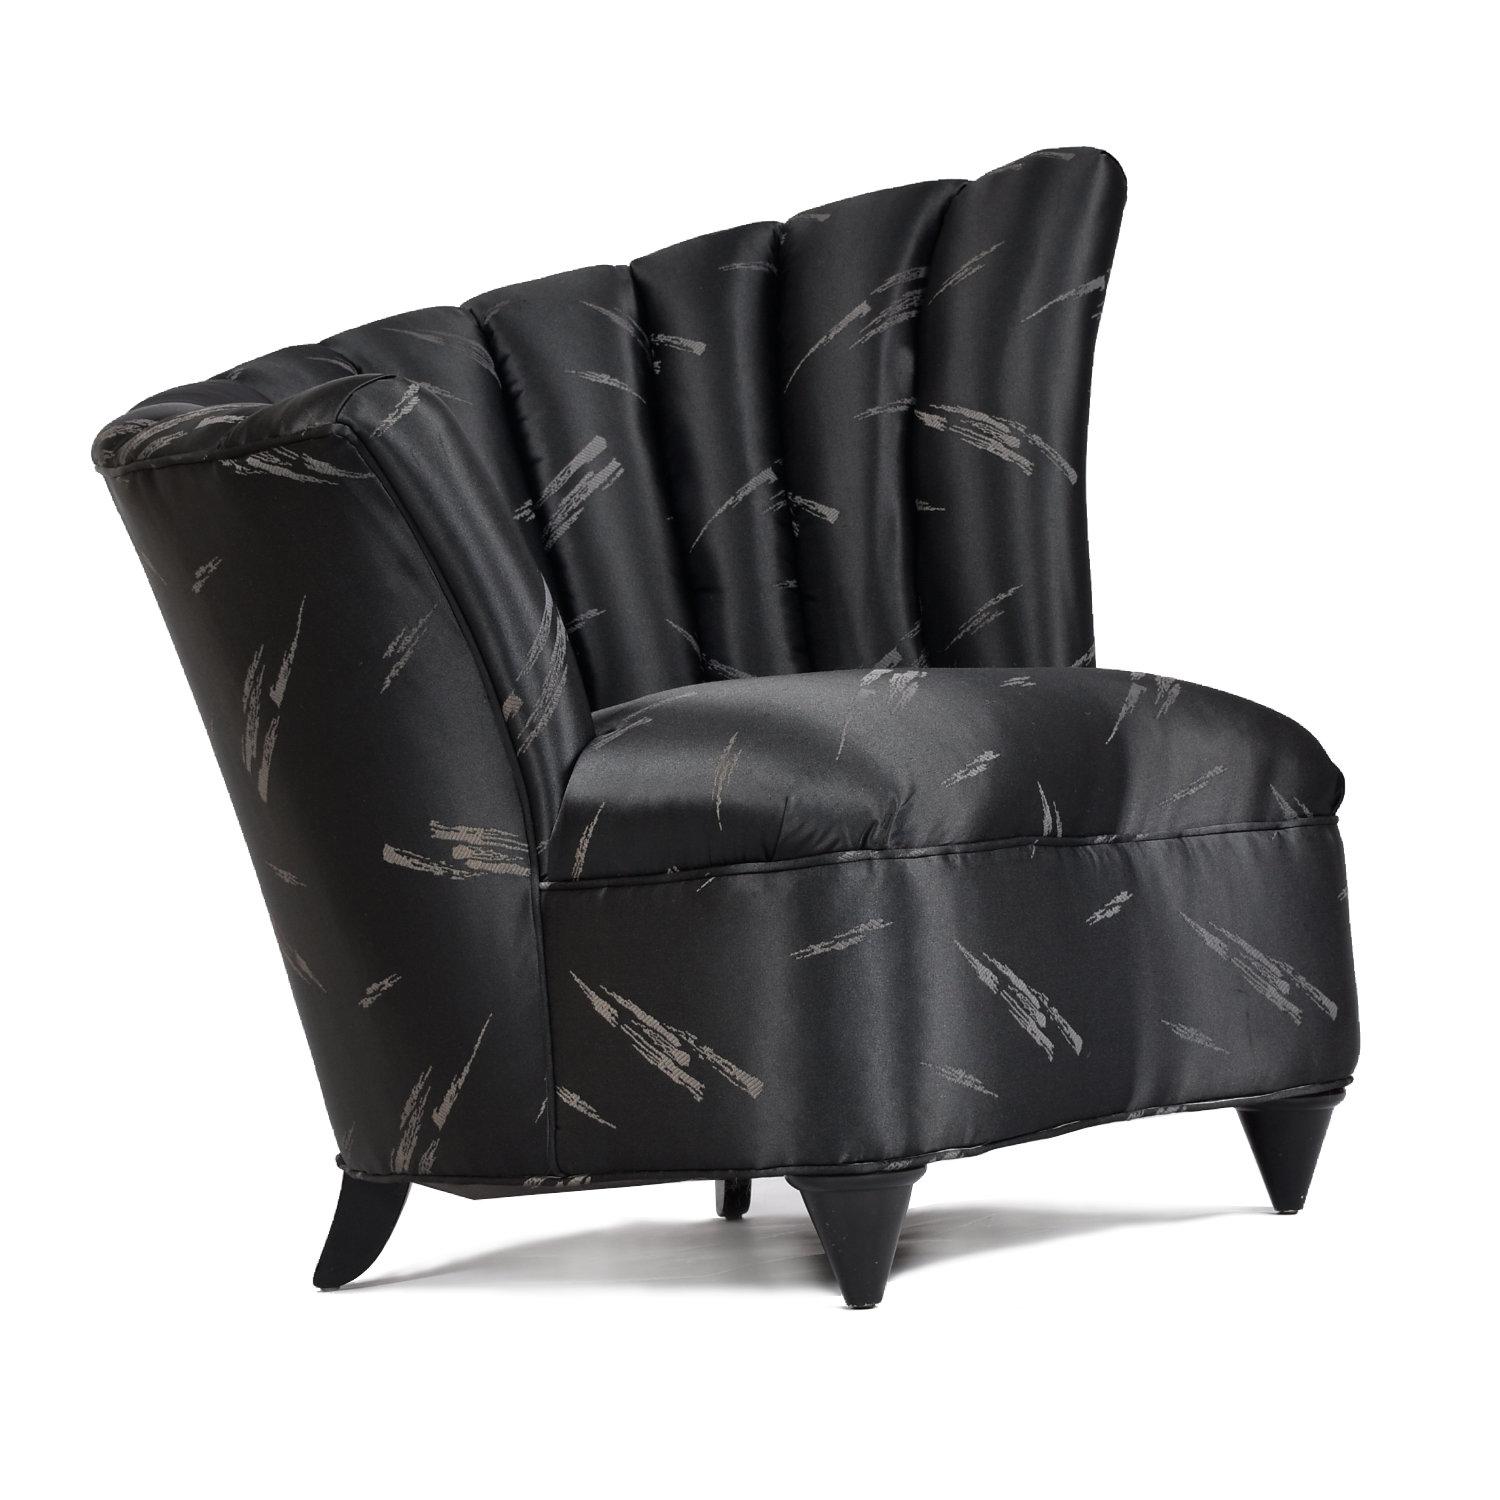 Pair of 1980s Neo-Deco Style Black Satin Scallop Fan Back Slipper Chairs In Good Condition For Sale In Chattanooga, TN